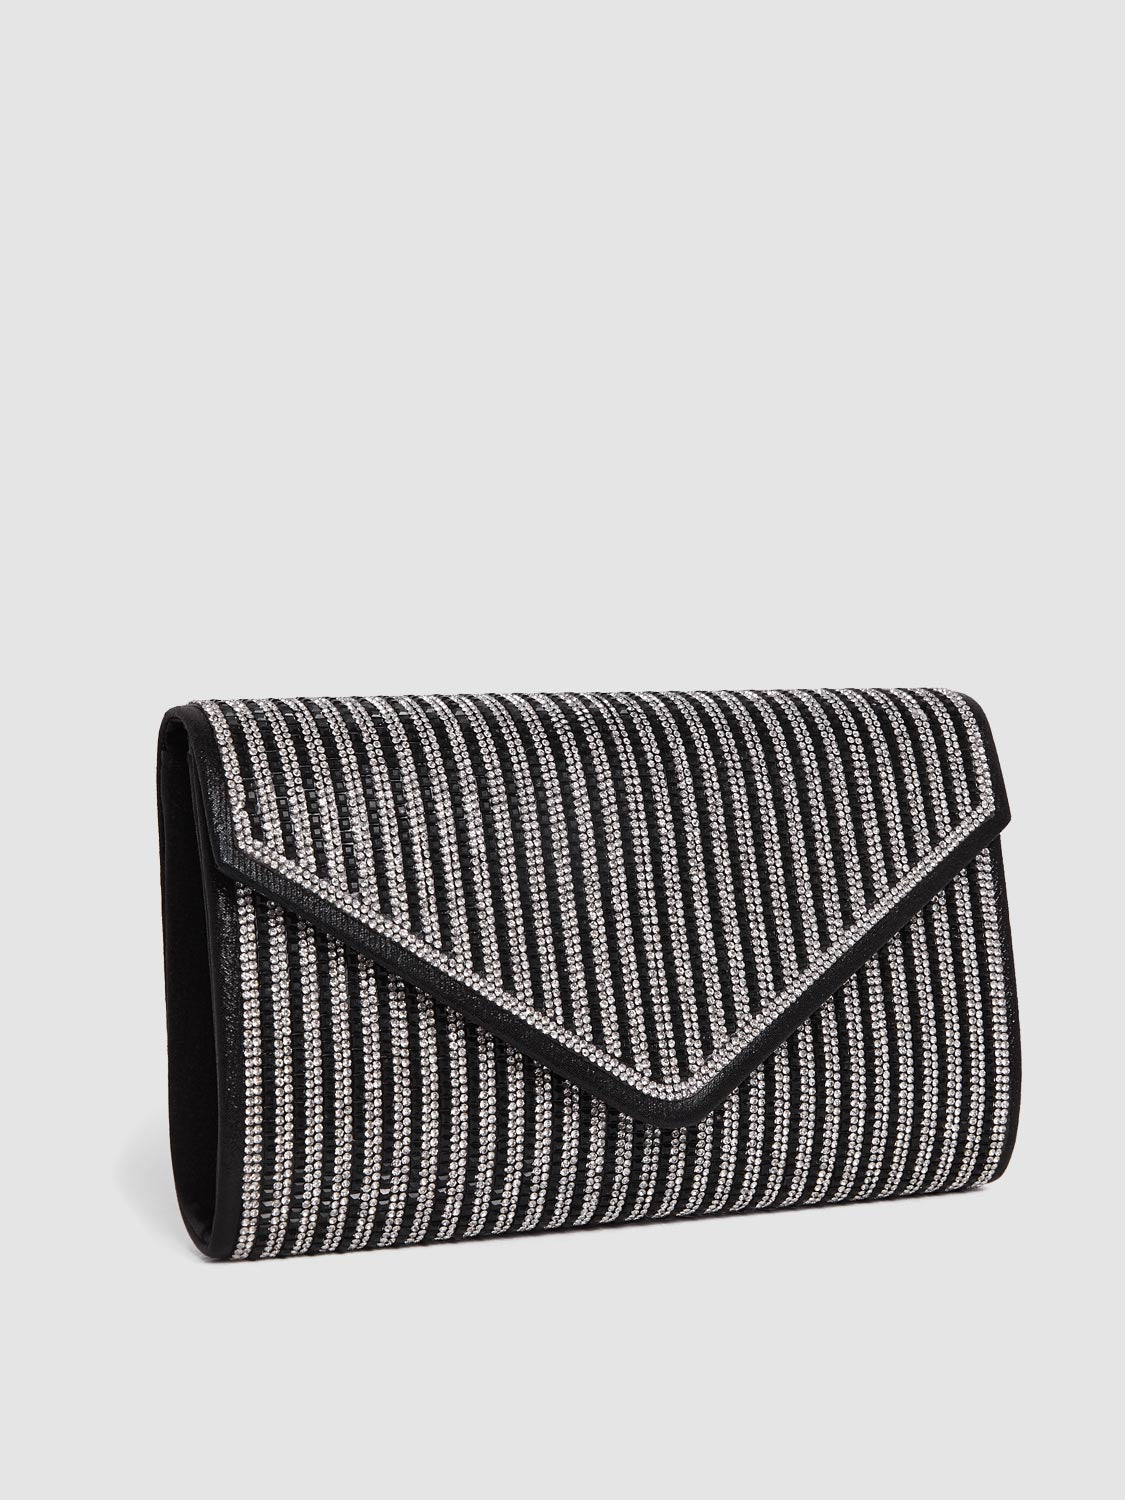 Rhinestone Envelope Flapover Clutch With Metal Chain